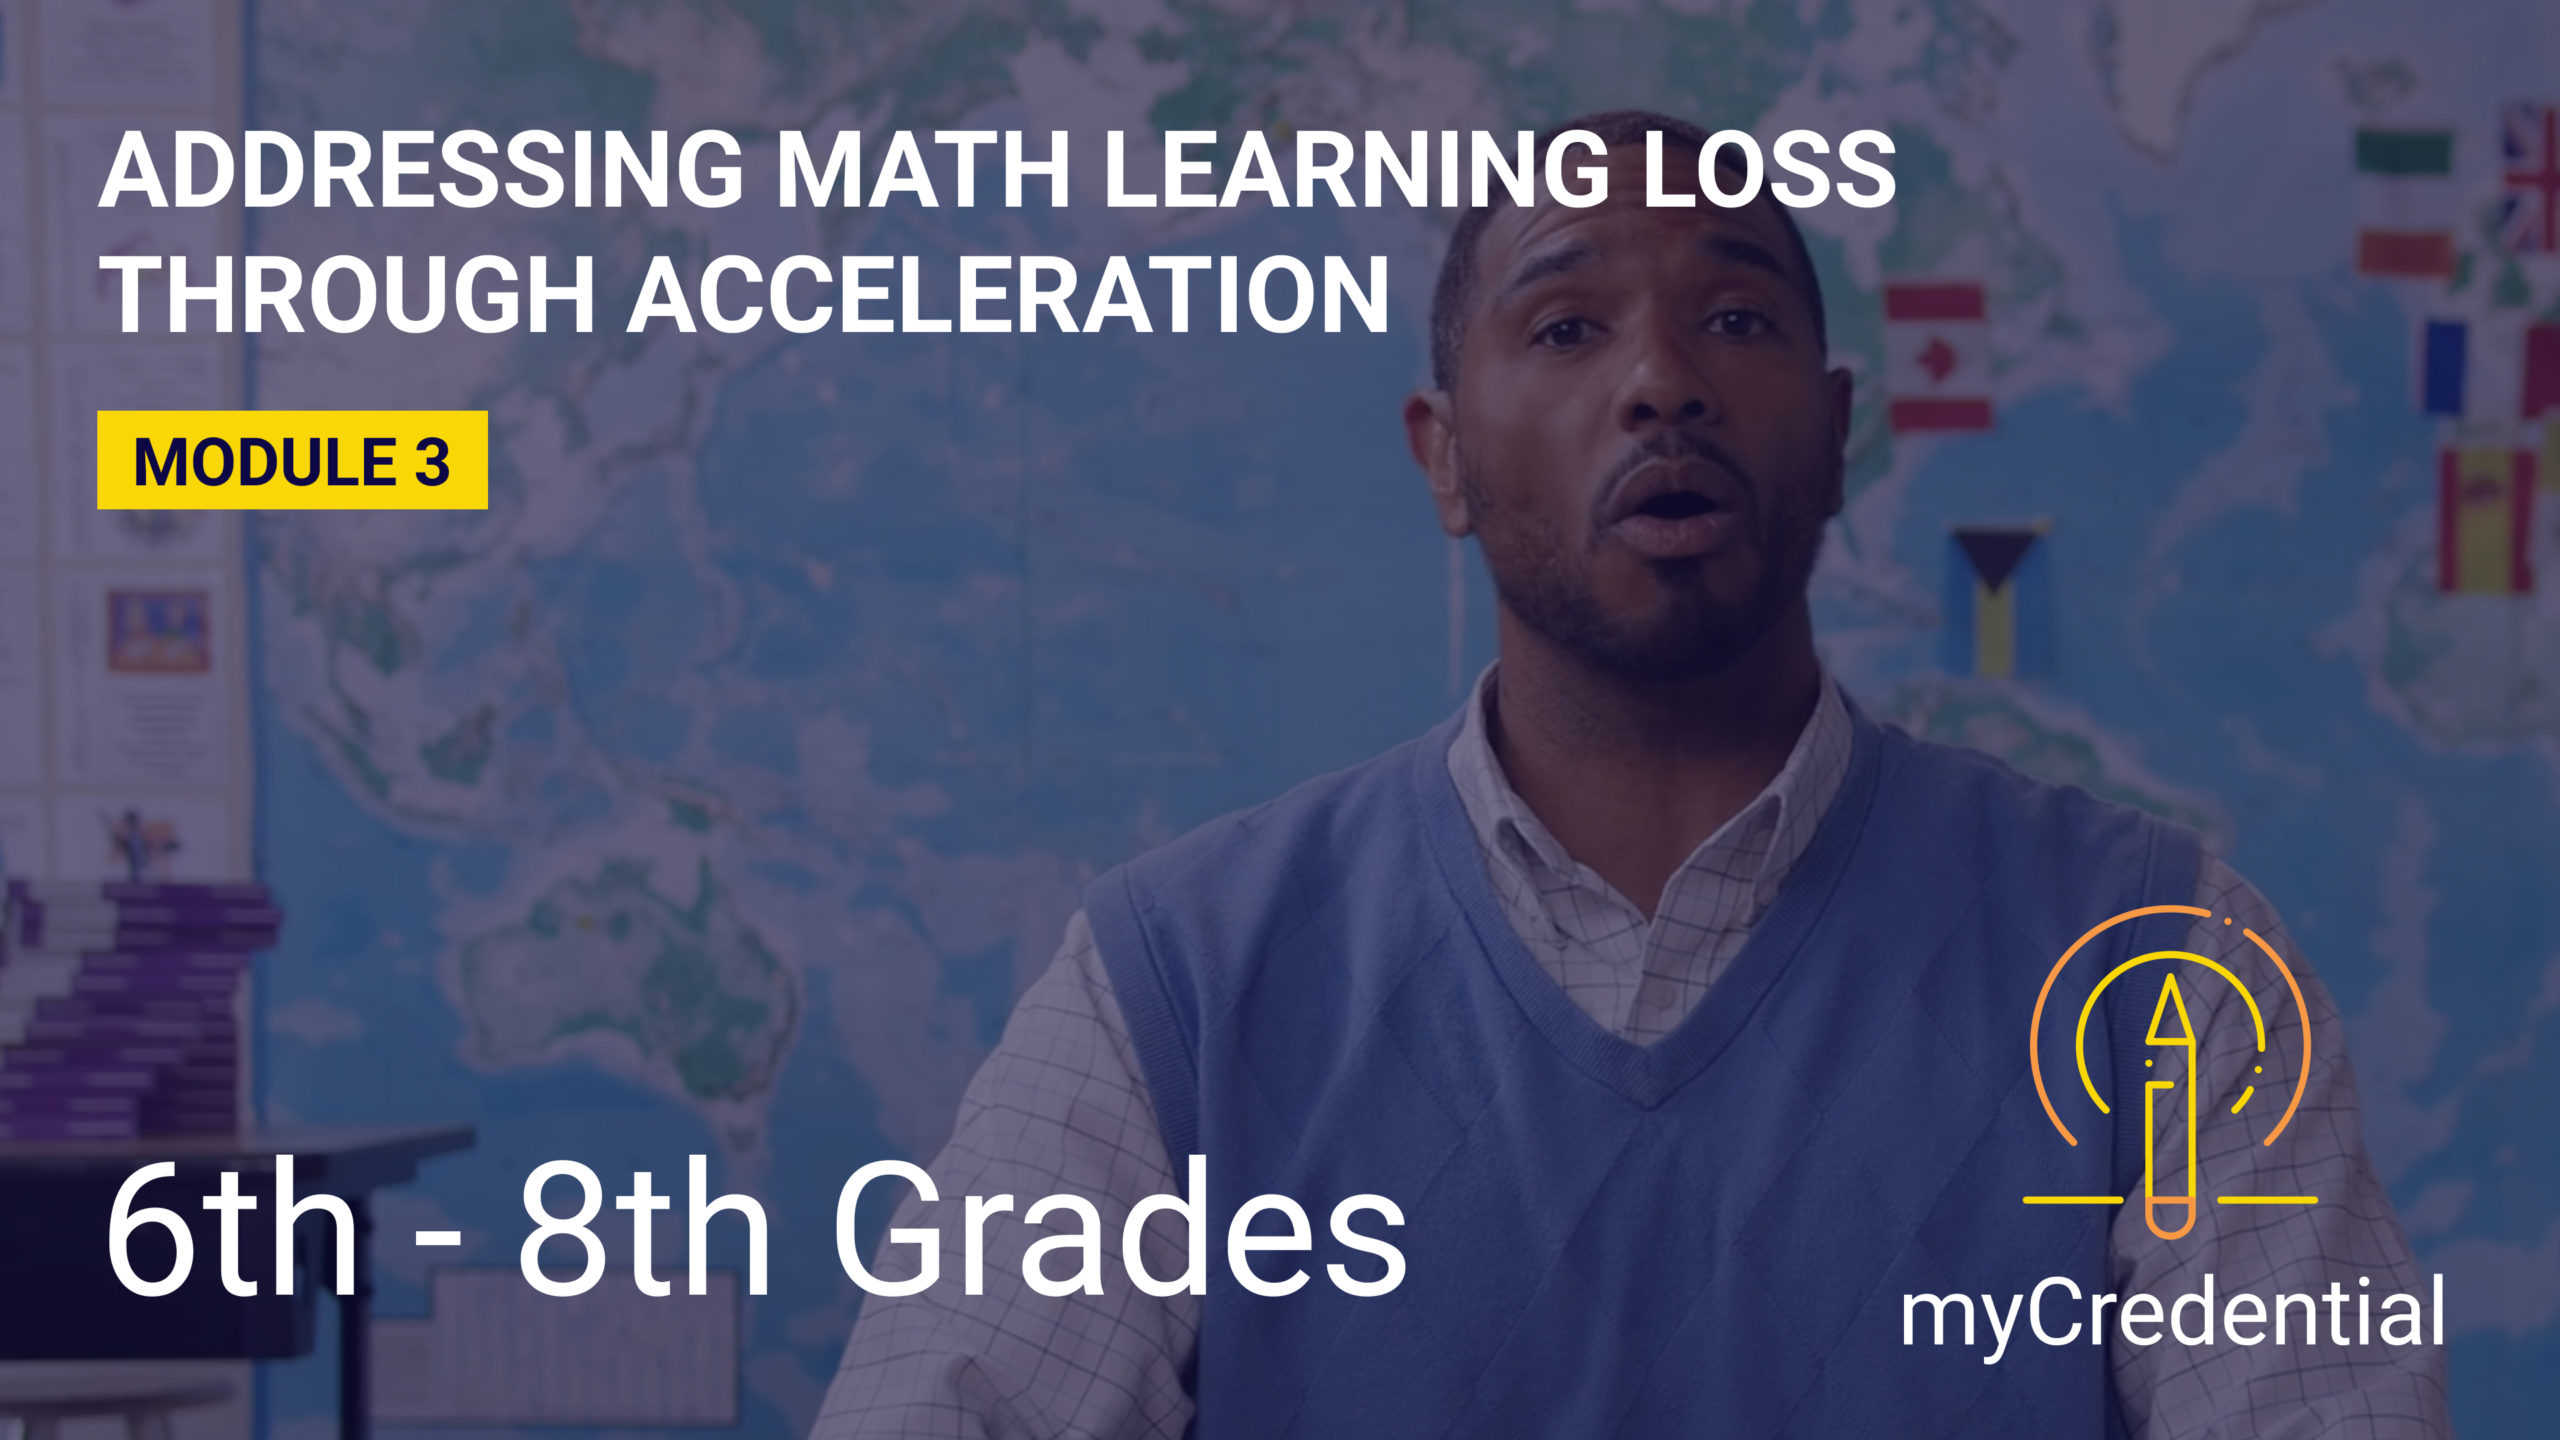 Addressing Math Learning Loss Through Acceleration (Module 3): 6th-8th Grades